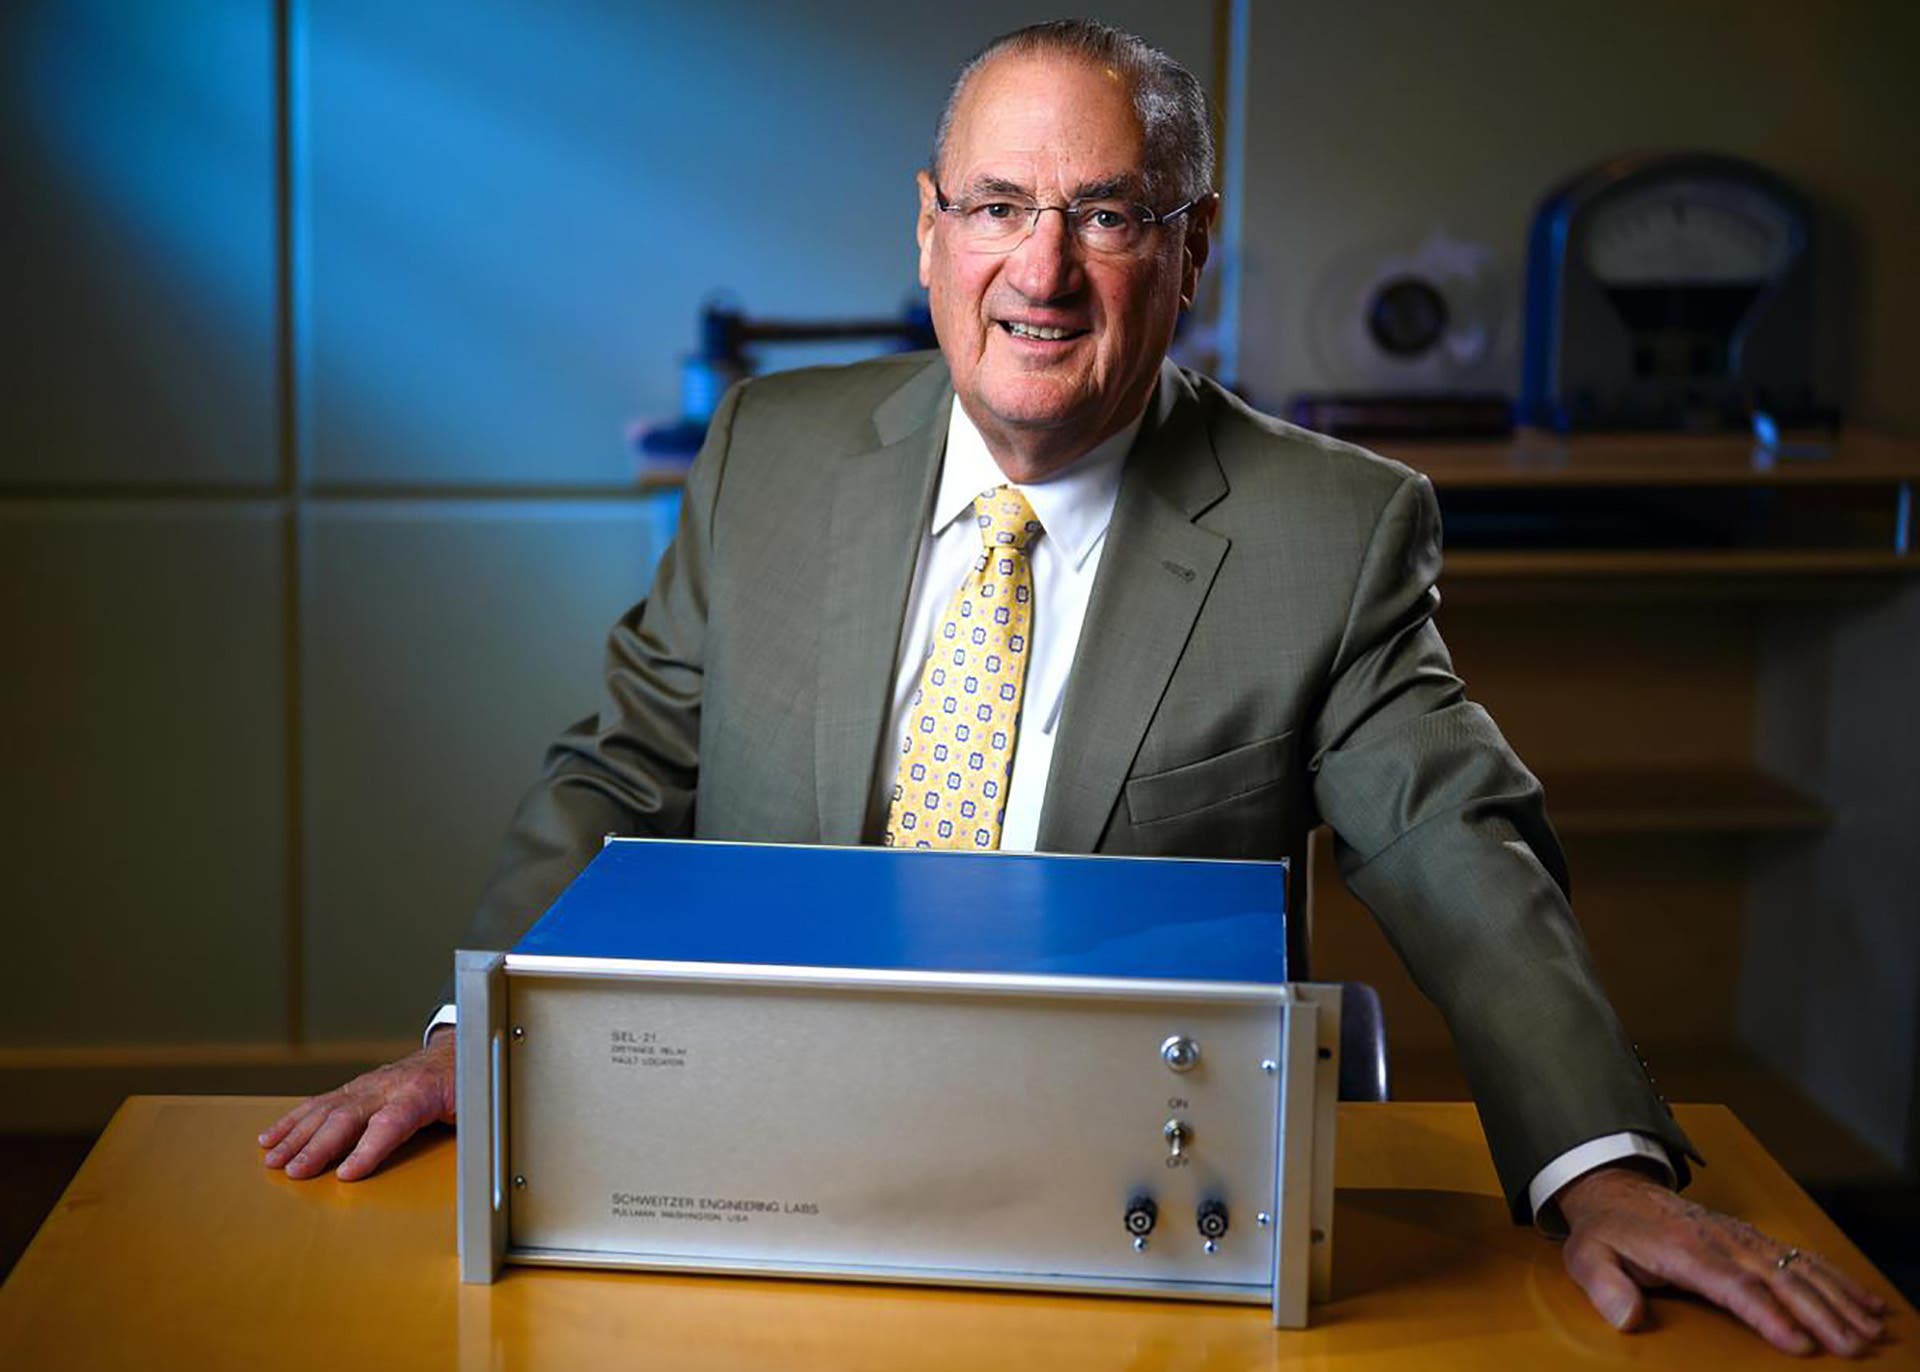 Edmund Schweitzer joins legends with induction into National Inventors Hall of Fame